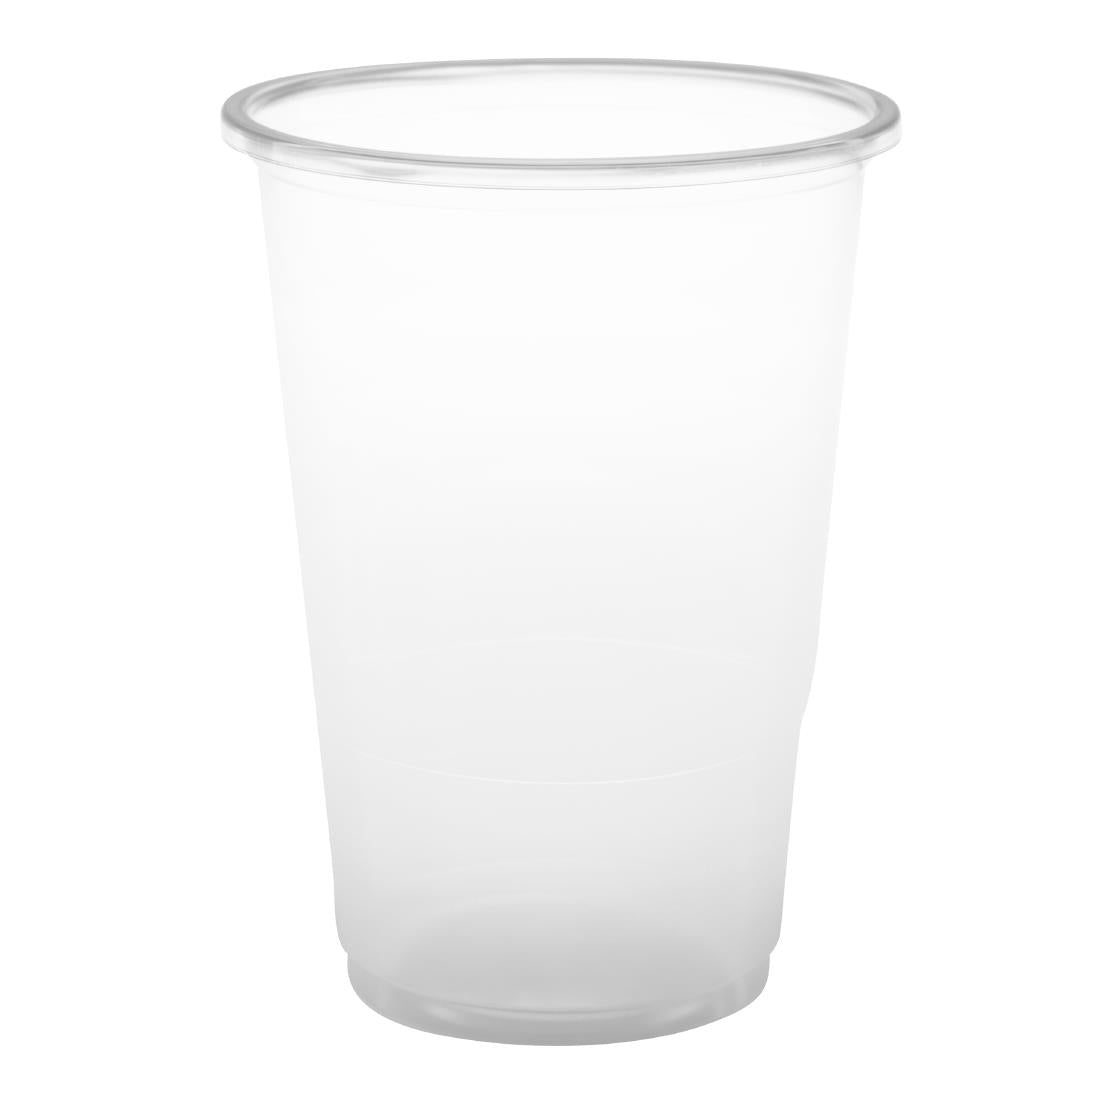 U379 eGreen Flexy-Glass Recyclable Half Pint To Brim CE Marked 284ml / 10oz (Pack of 1000)